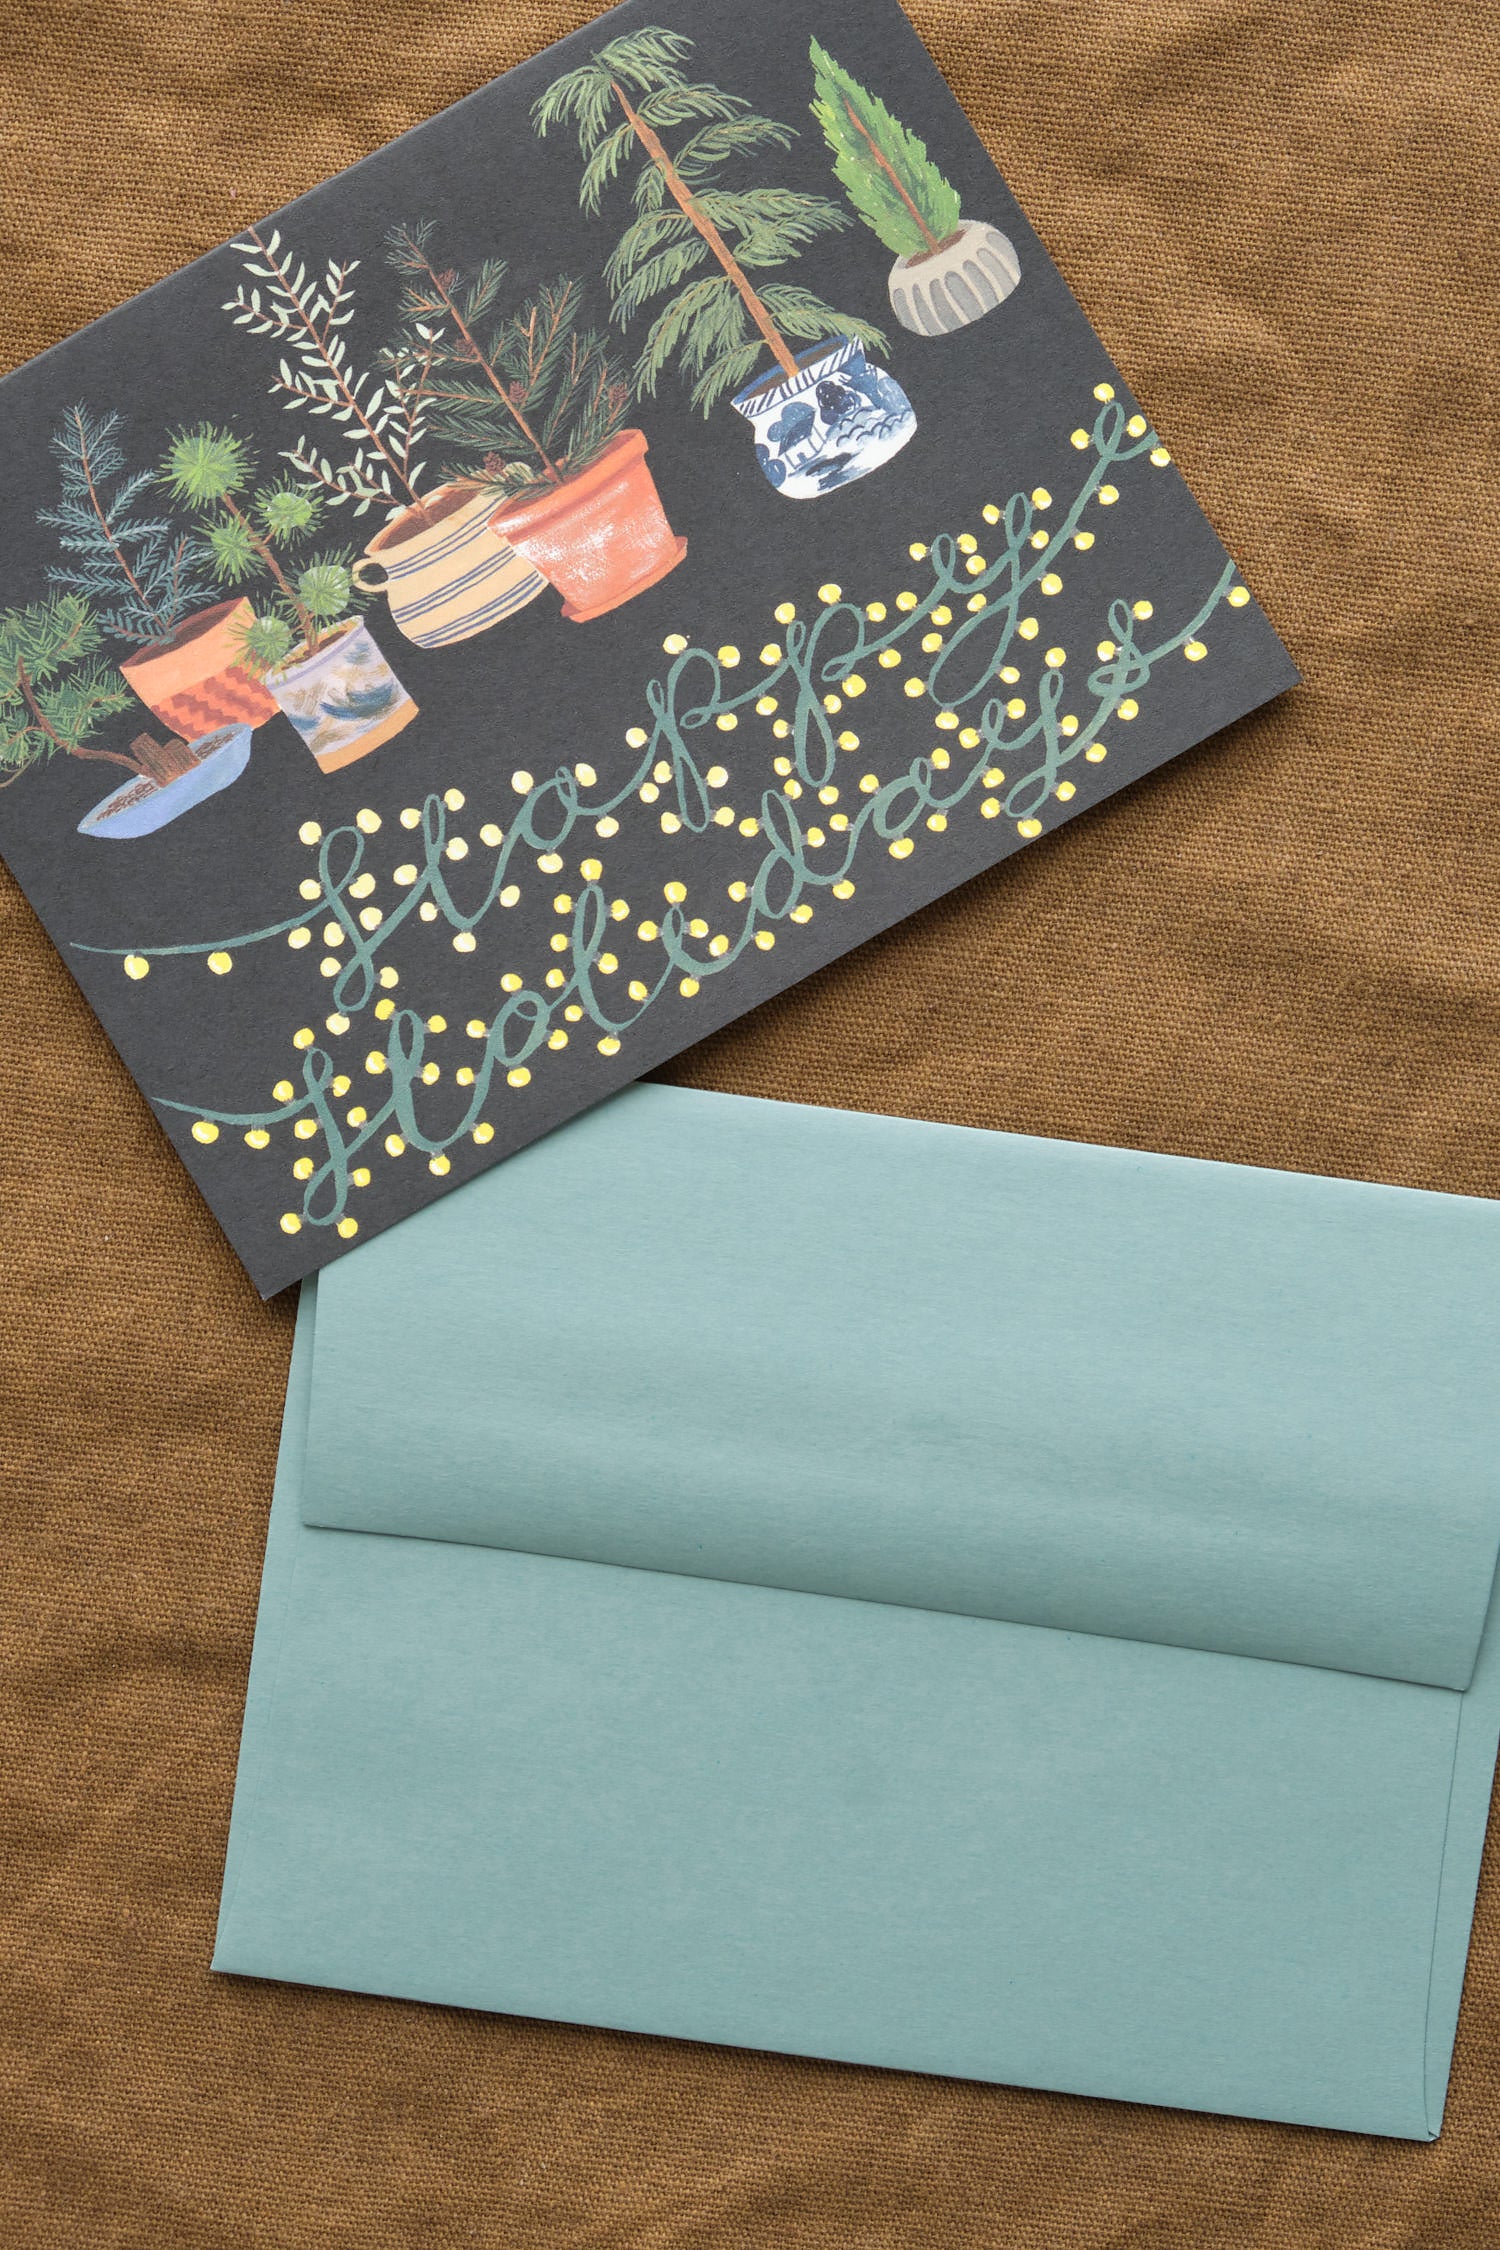 Potted Evergreens Holidays Card with envelope